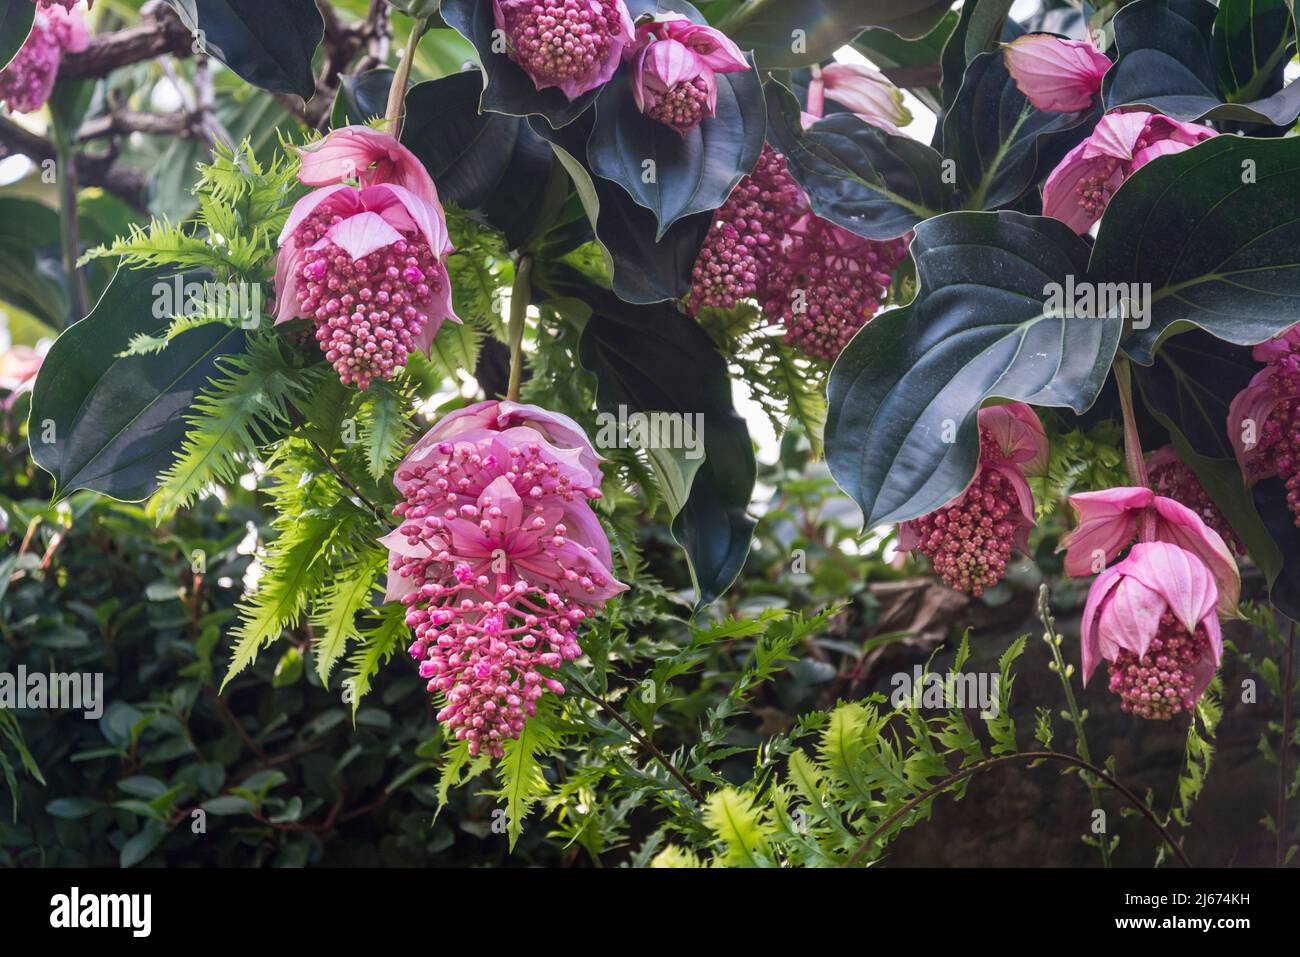 Medinilla magnifica, the showy medinilla or rose grape is a species of flowering plant in the family Melastomataceae, native to the Philippines Stock Photo